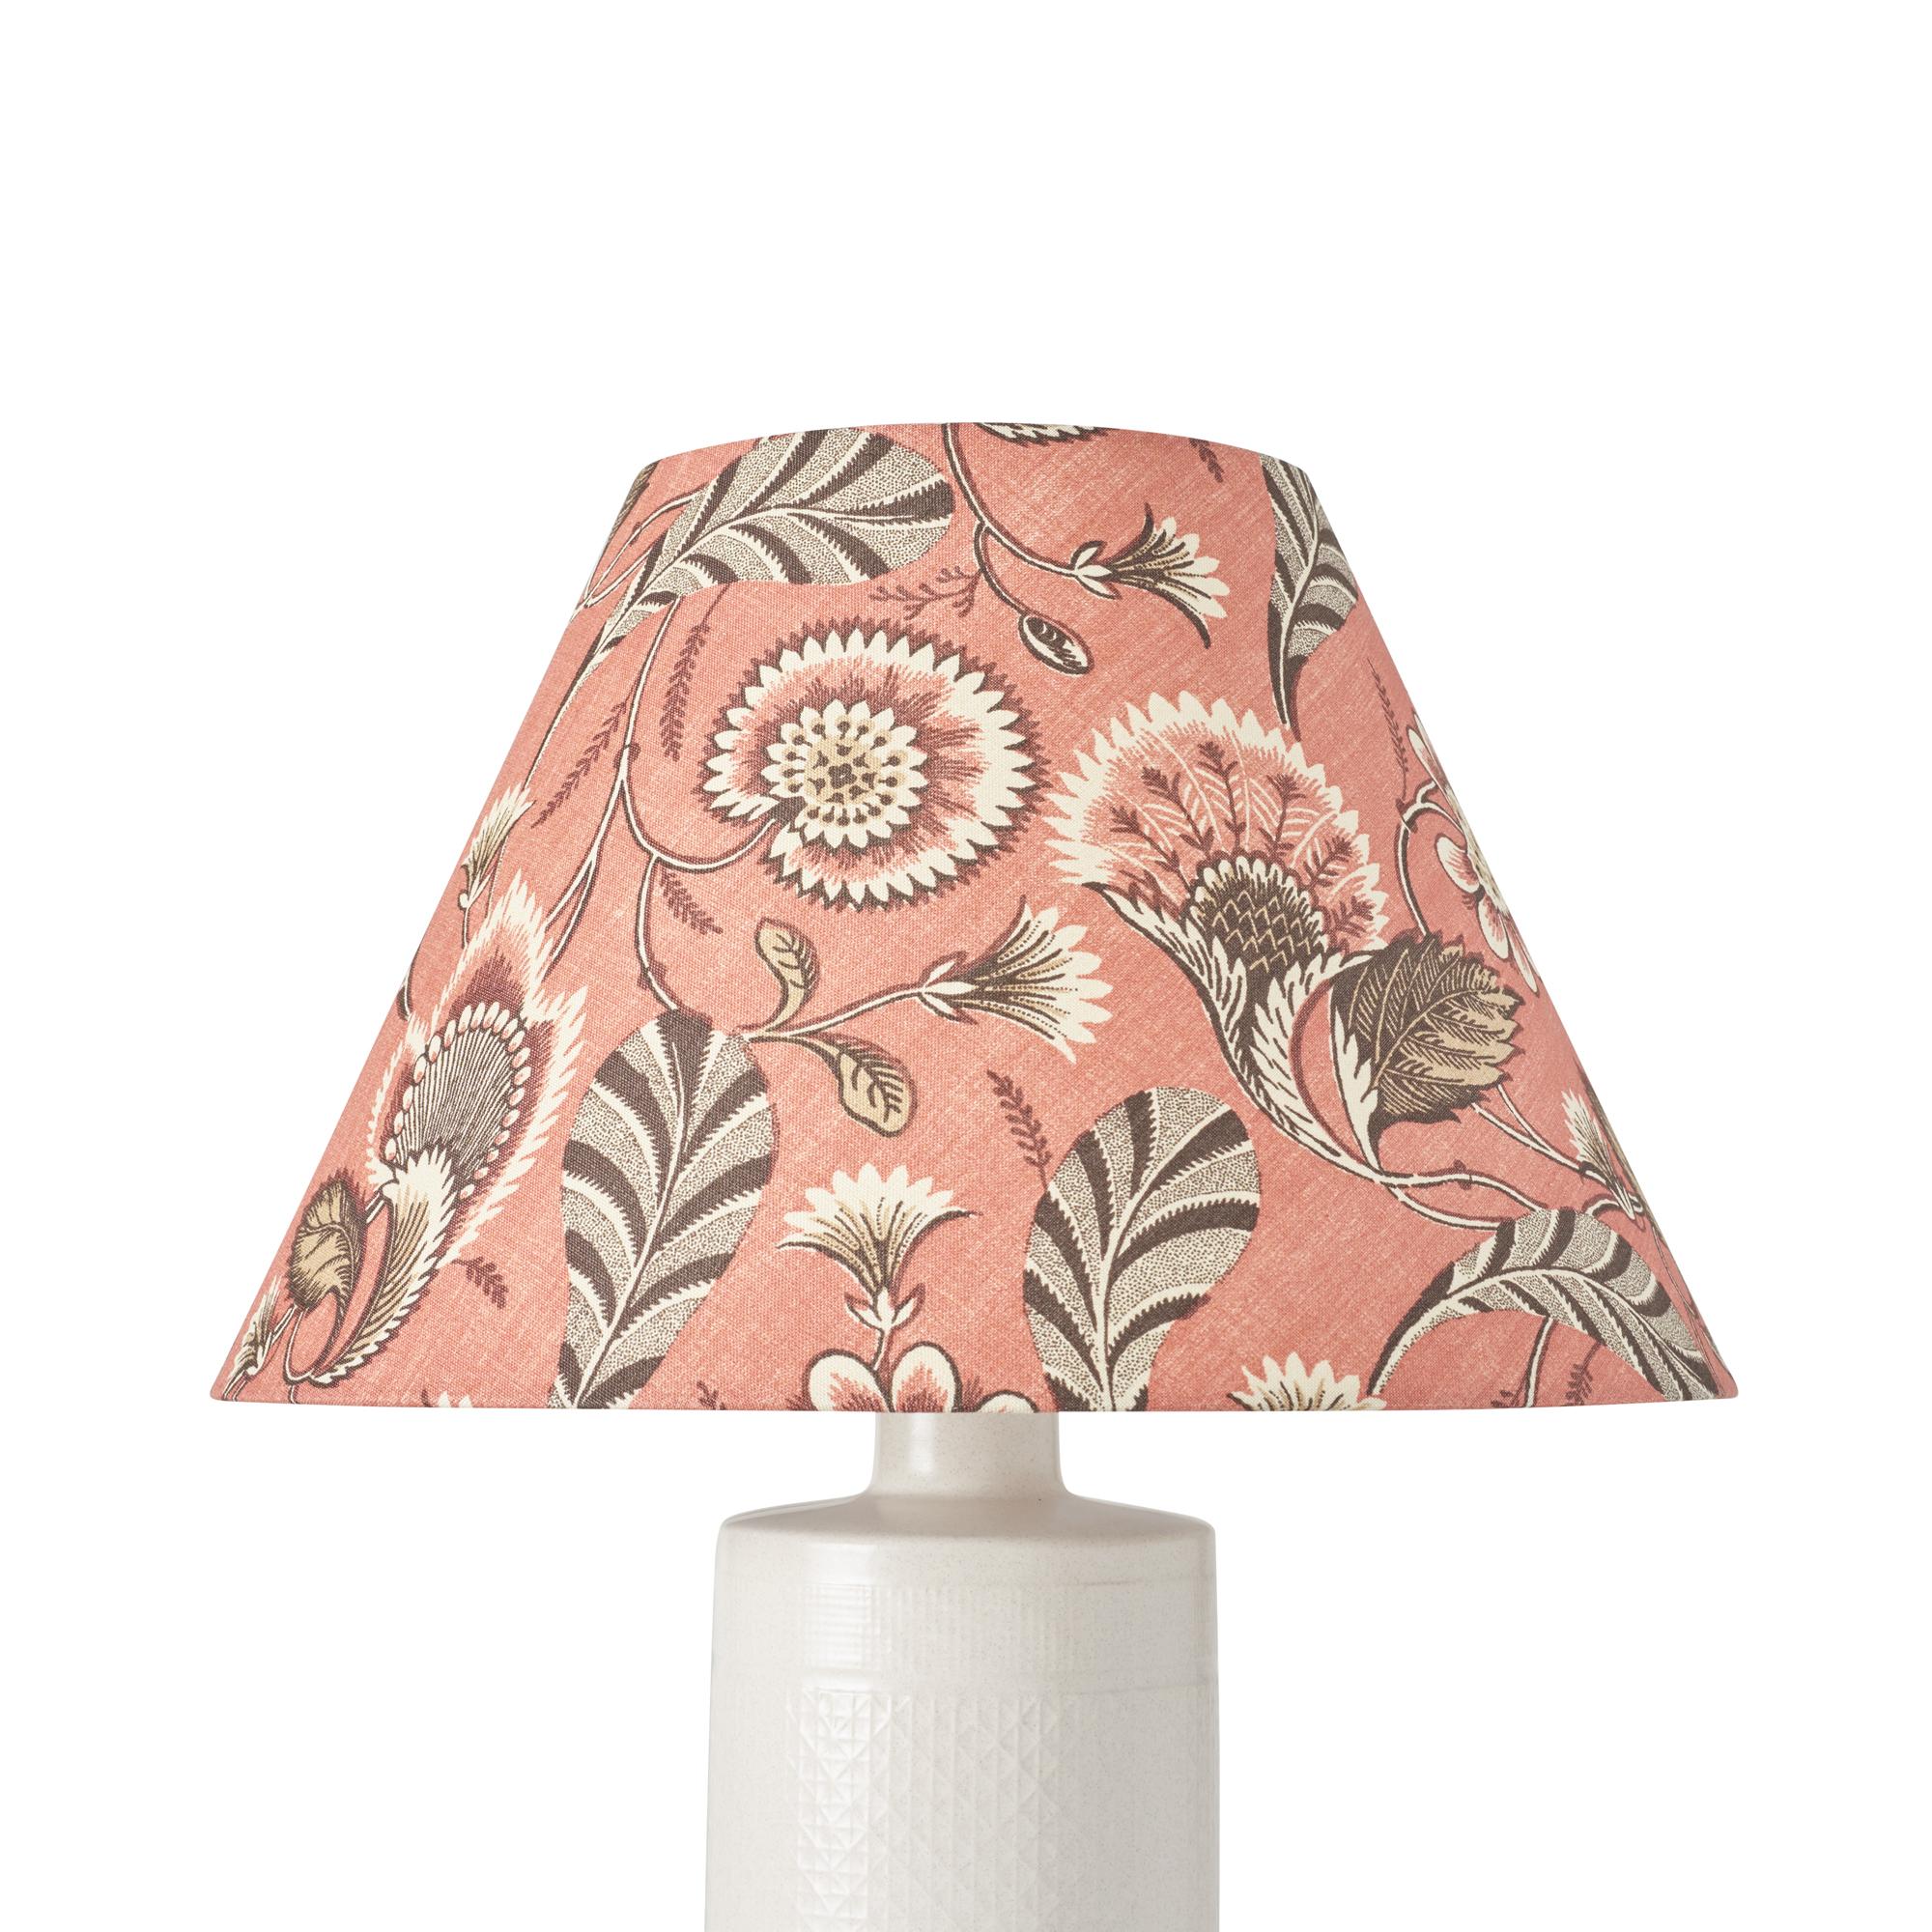 This lampshade features our Ursula pattern in Document. Ursula is an enchanting combination of crisp, graphic elements and romantic, feathery florals. 8